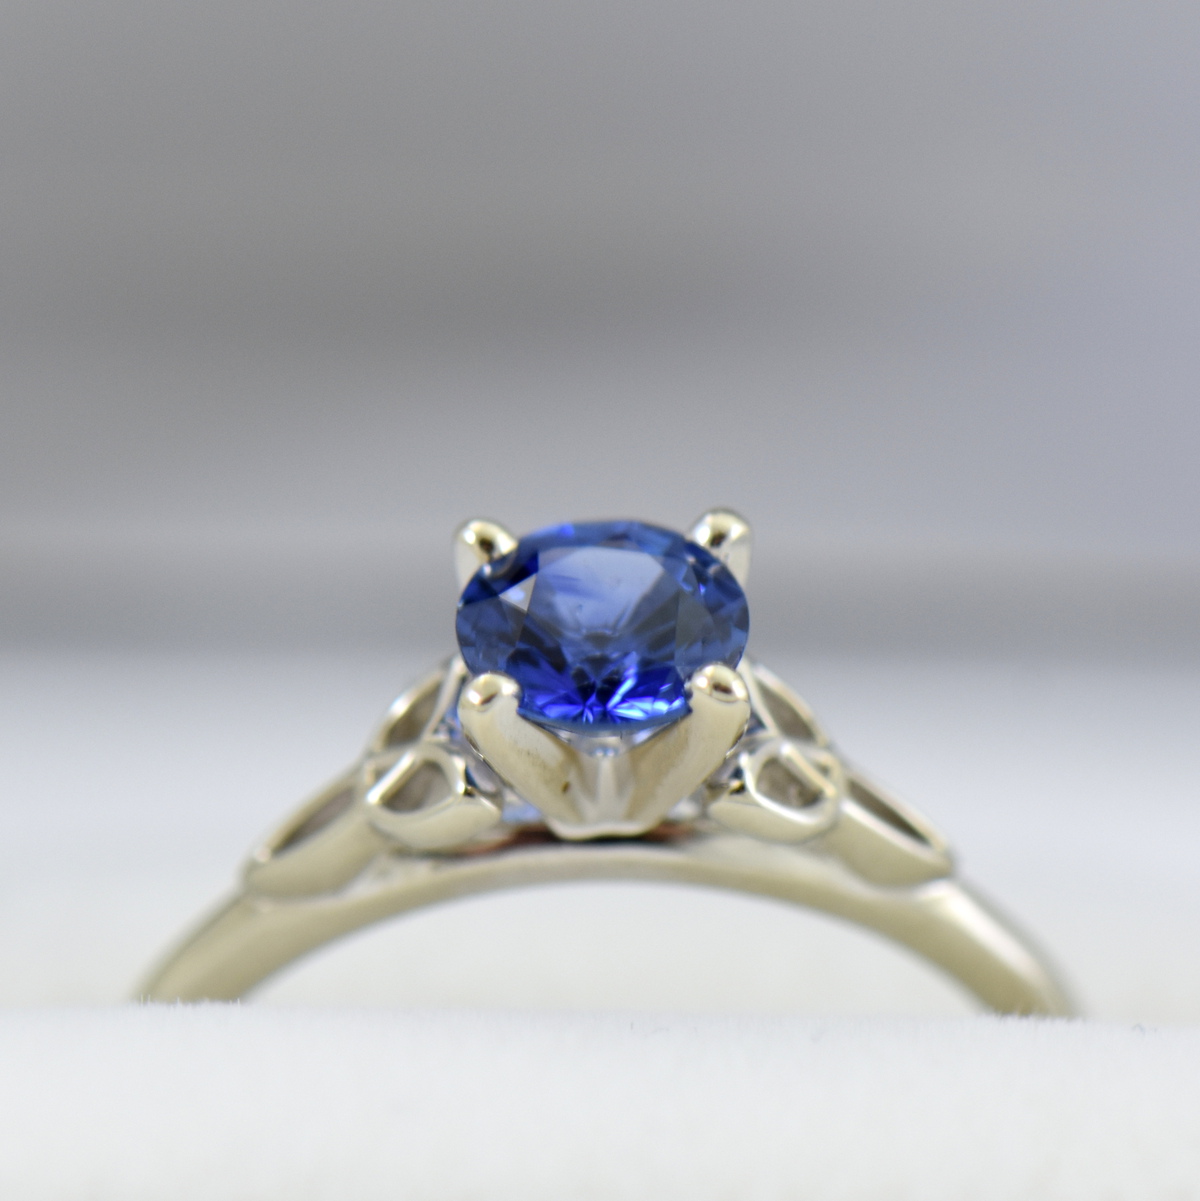 Blue Sapphire Engagement Ring with Celtic Trinity Accents | Exquisite ...